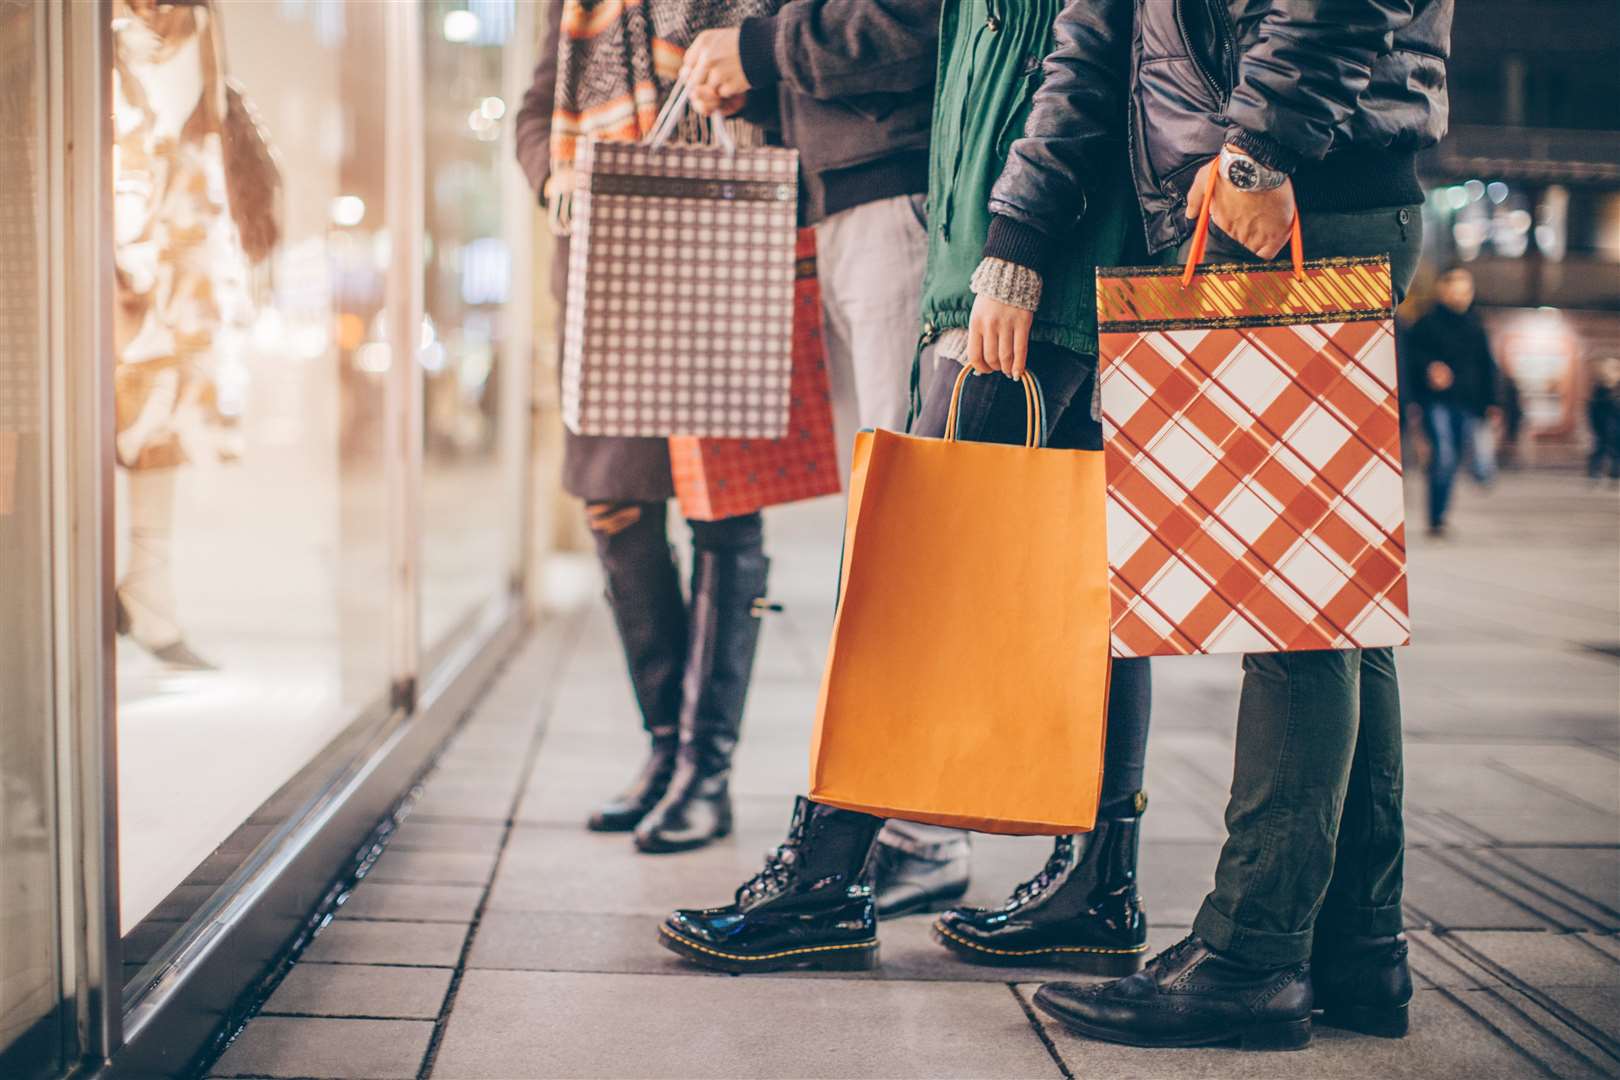 The town's biggest retailers will have special shopping hours